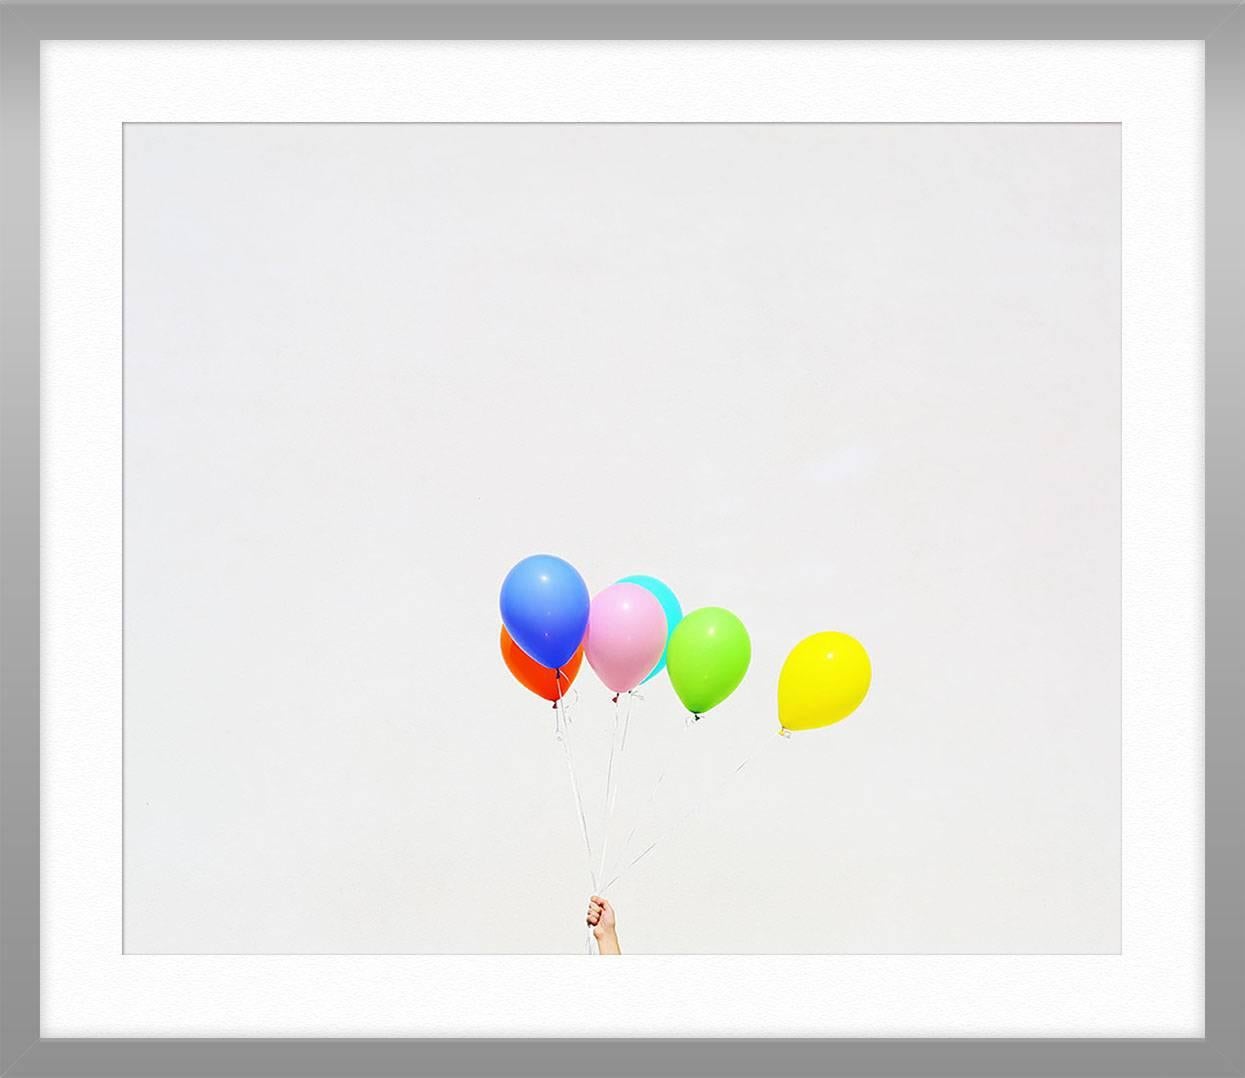 Untitled (Balloons) 3